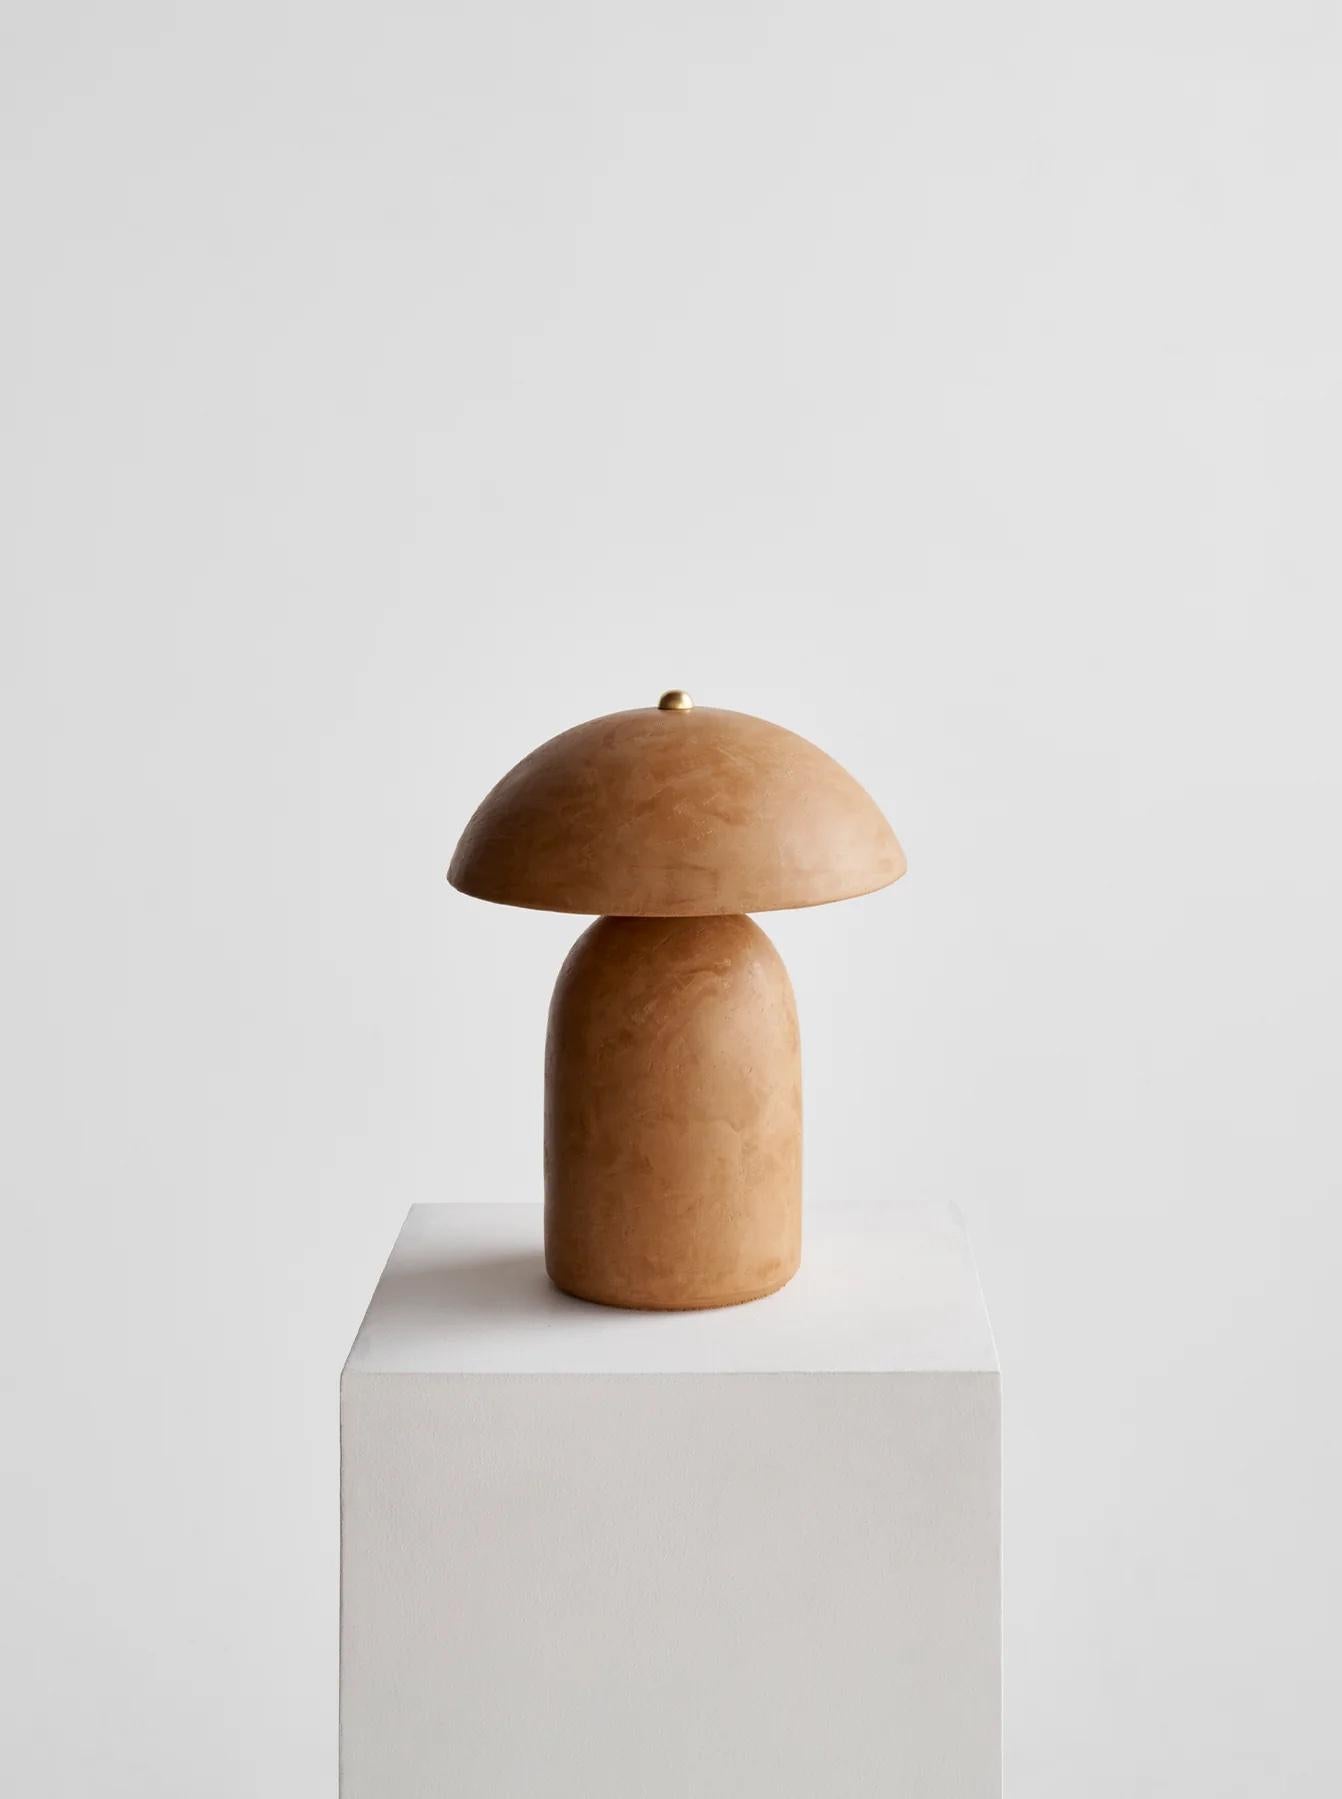 American XL Tera Lamp in Beige Lime Plaster by Ceramicah For Sale